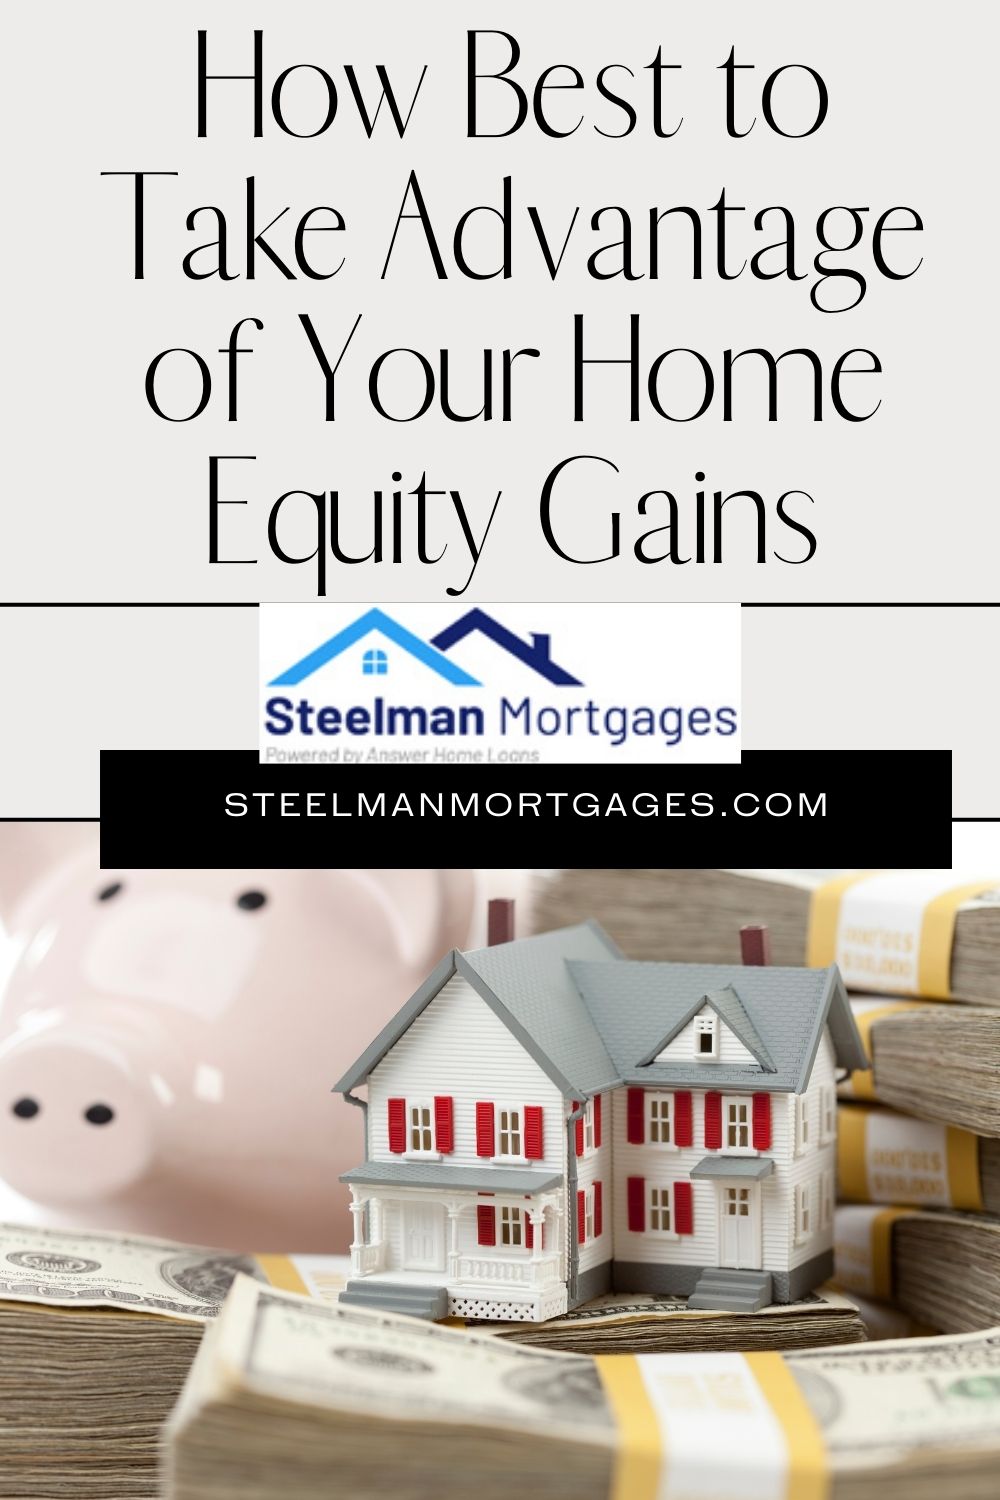 How Best to Take Advantage of Your Home Equity Gains